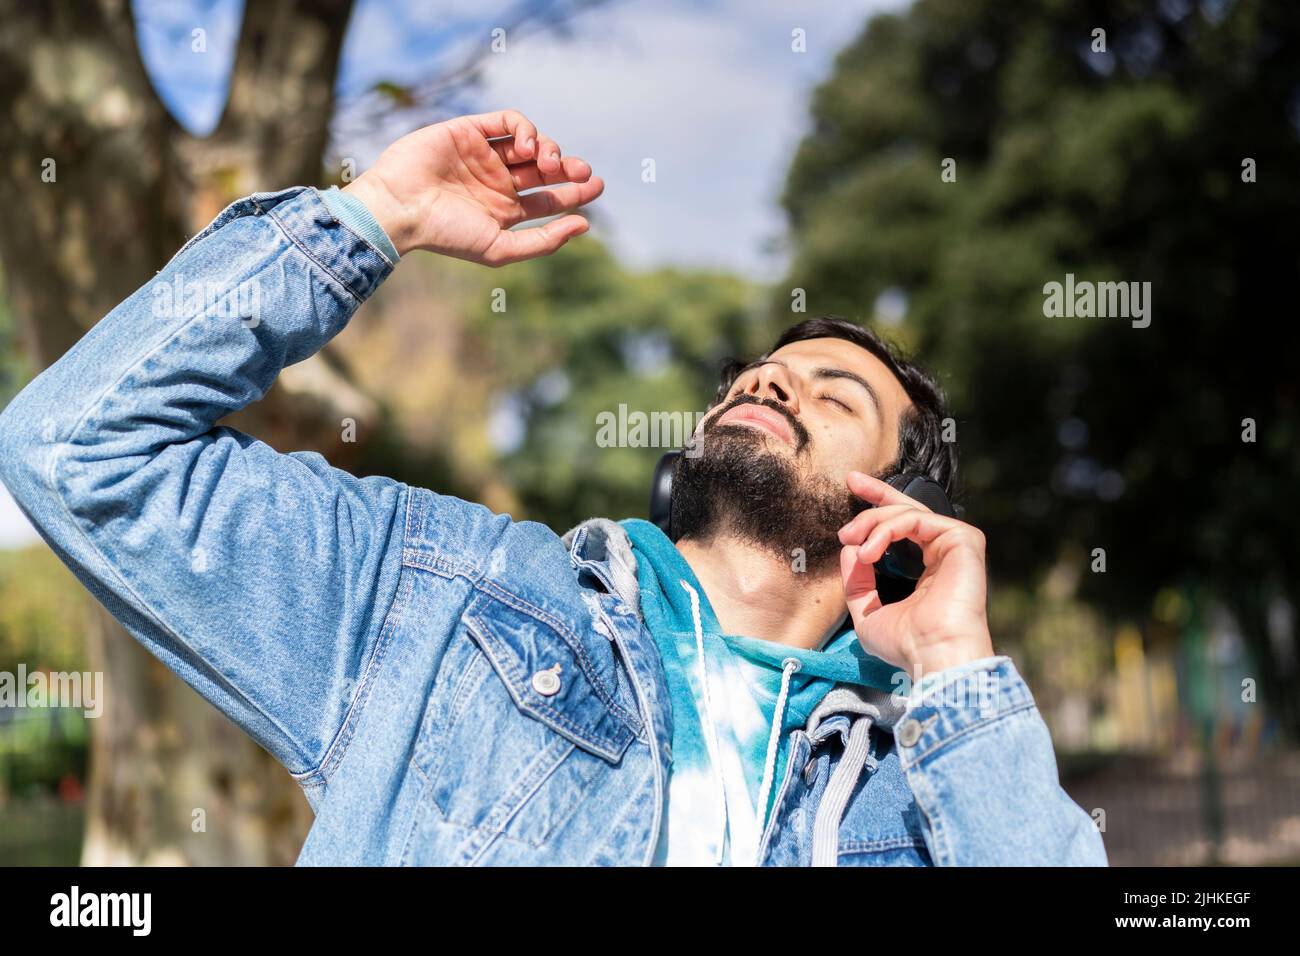 Young latin man listening to music outdoors with headphones. Expression of happiness, winning attitude. Stock Photo